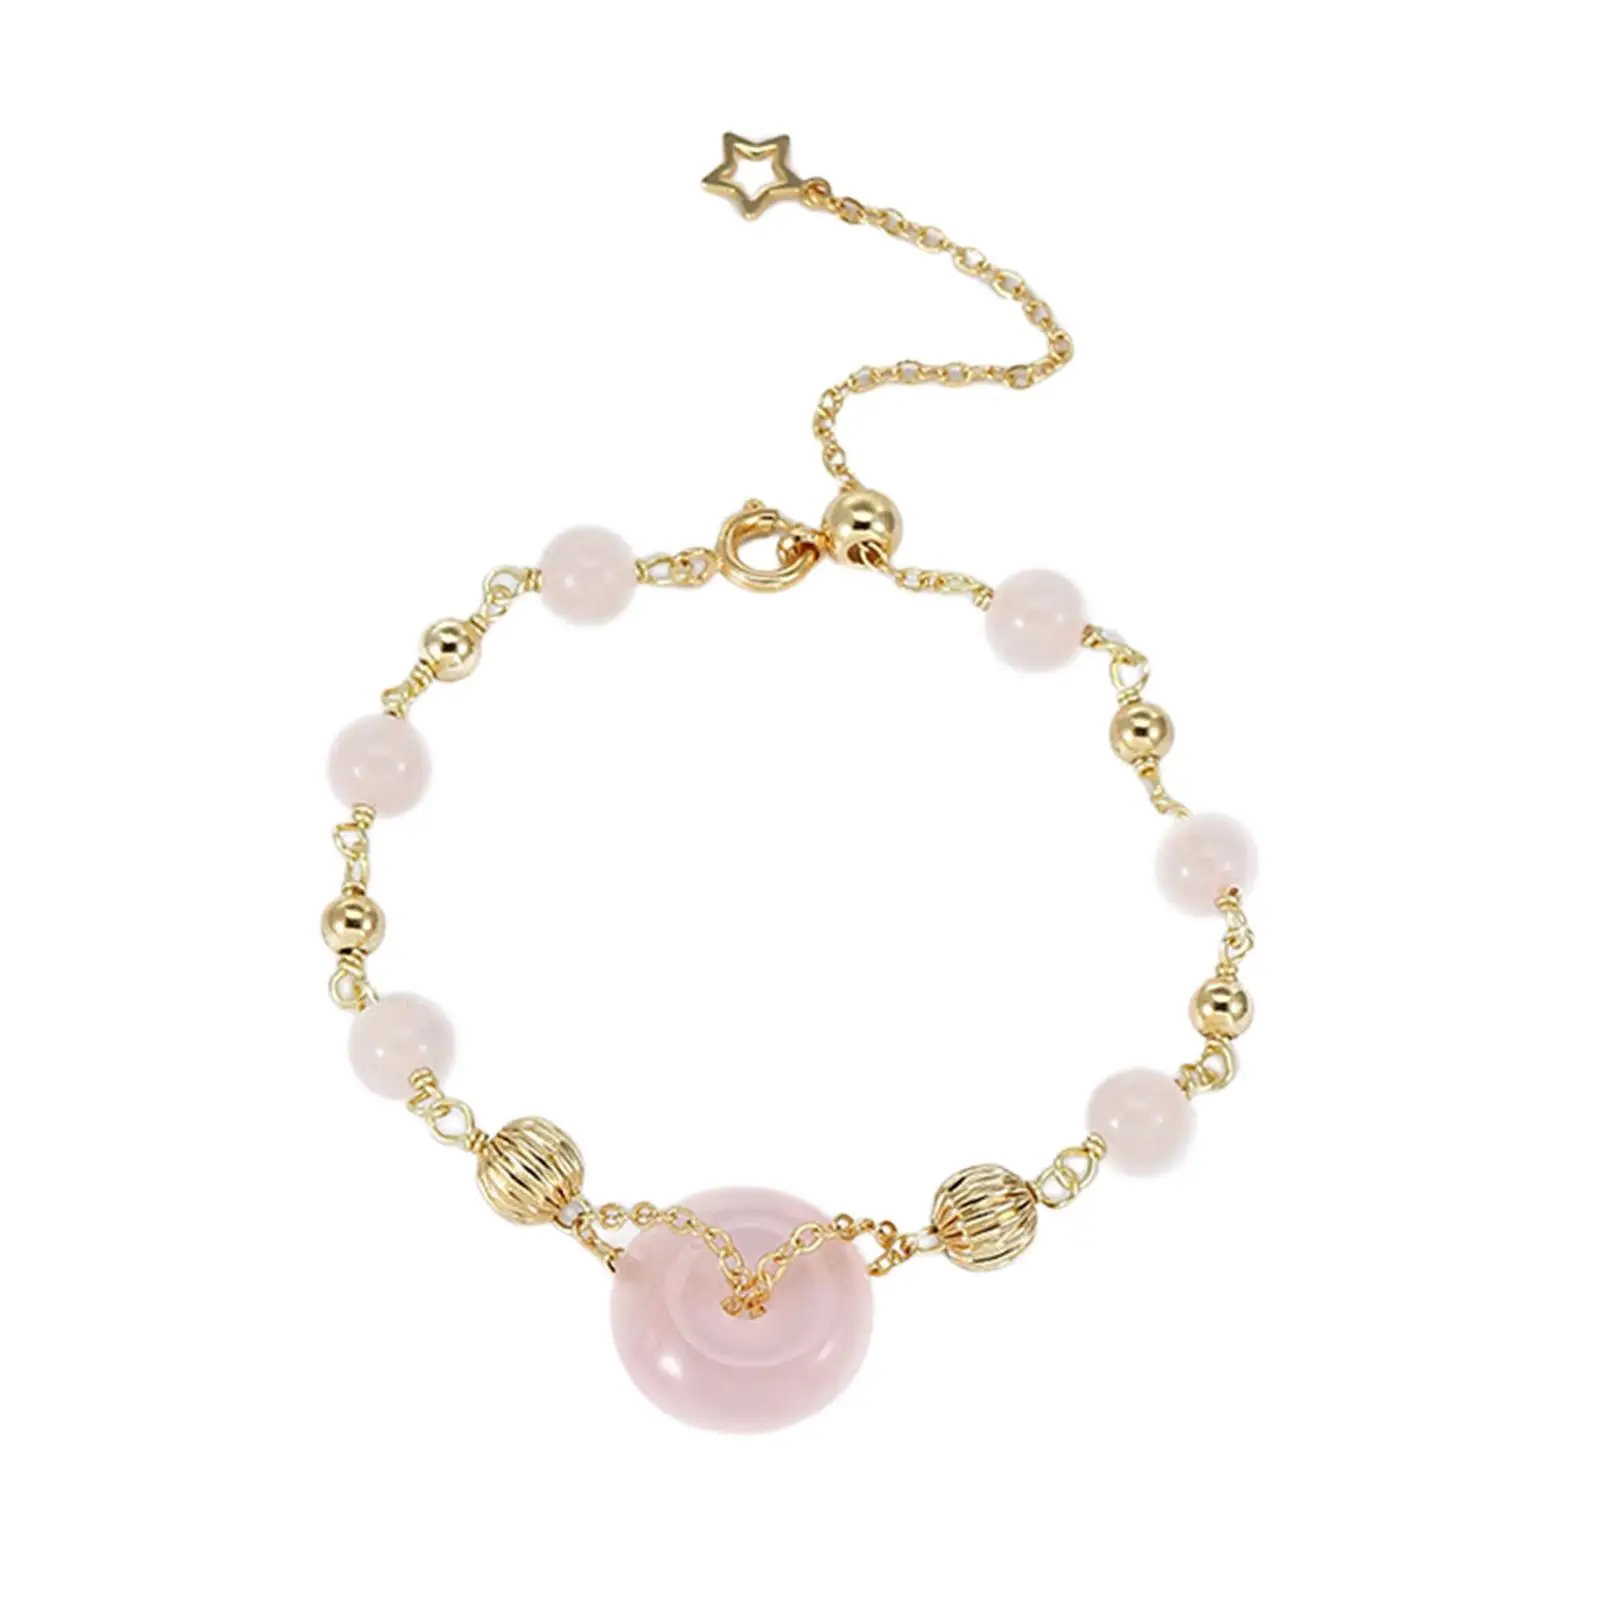 Elegant Pink Beads Bracelet Decorative Delicate Jewelry Charm Beaded Bangle for Girls Women Wedding Different Ages Daily wearing